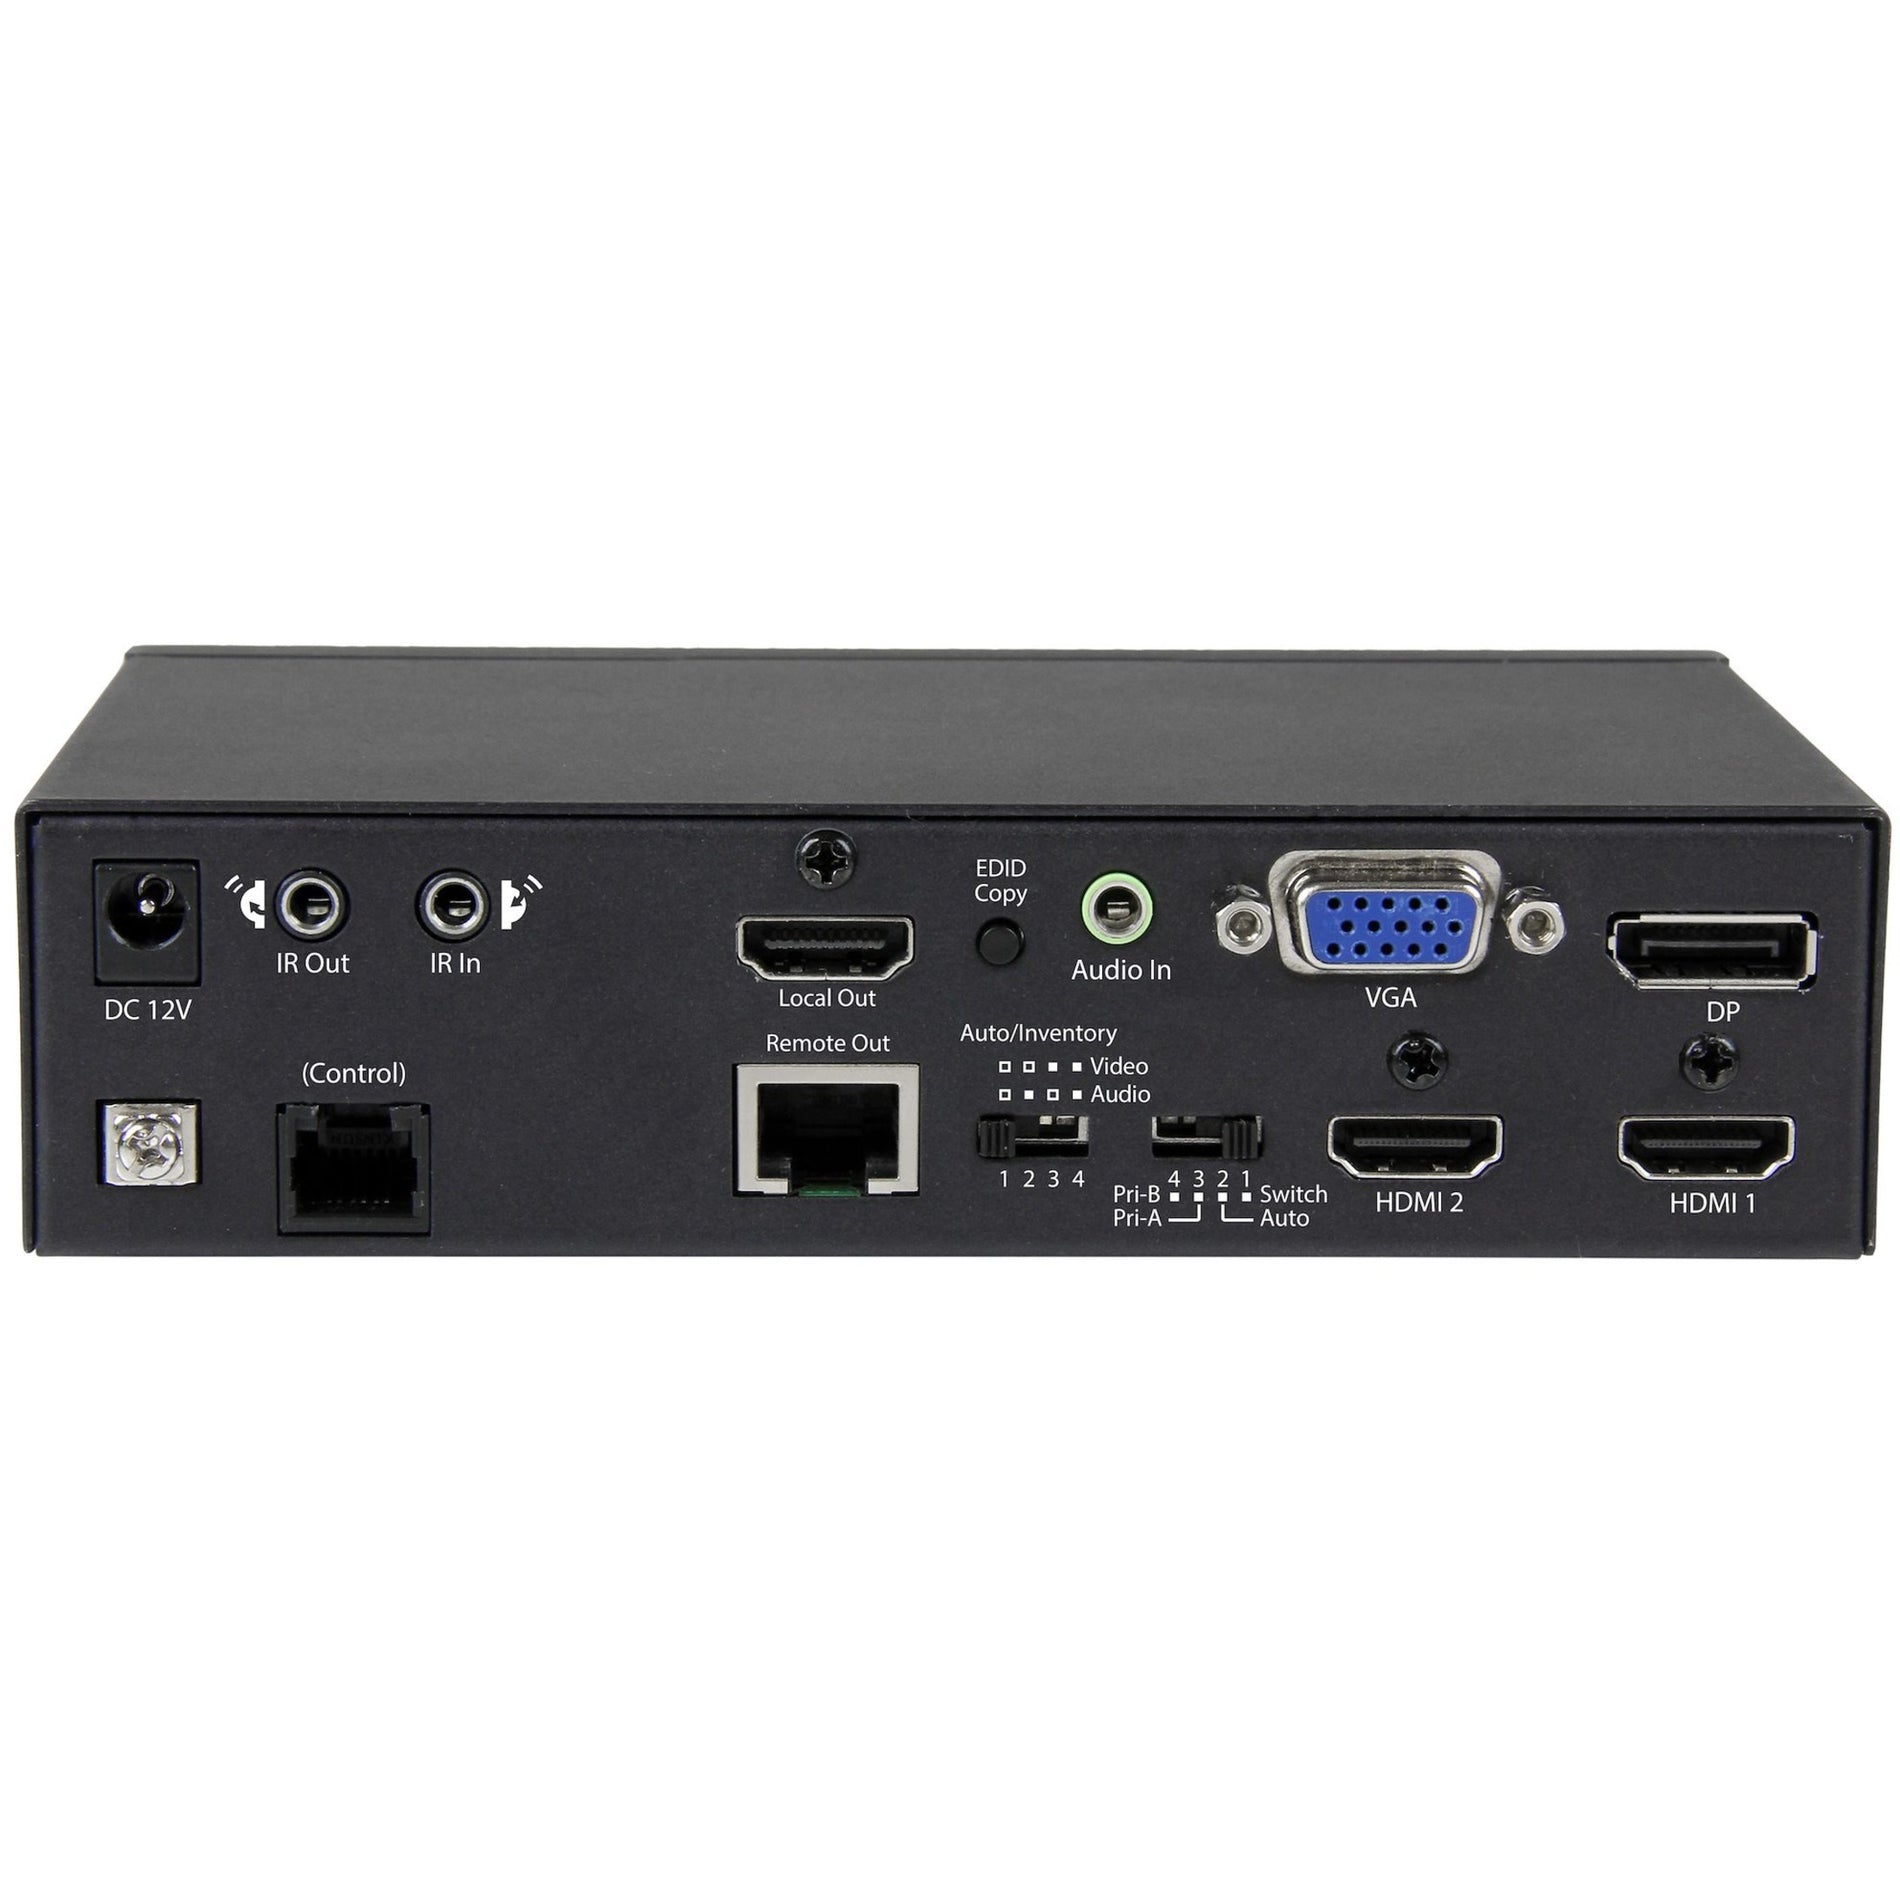 StarTech.com STDHVHDBT Multi-Input HDBaseT Extender with Built-in Switch - DisplayPort VGA and HDMI Over CAT5 or CAT6 - Up to 4K, up to 230 ft